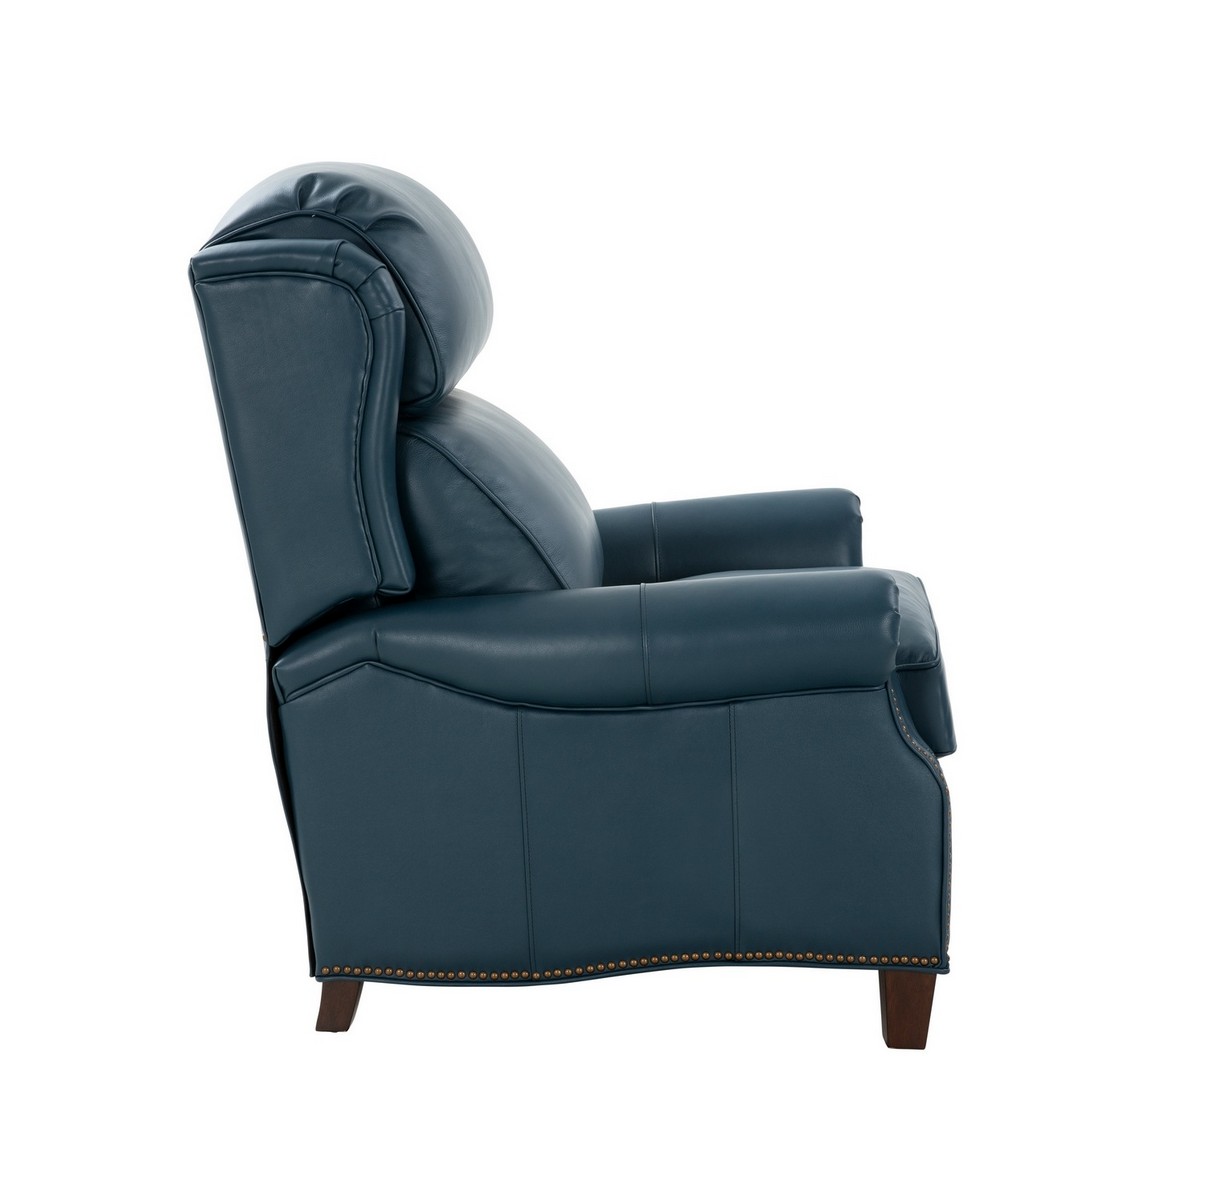 Barcalounger Meade Recliner Chair - Prestin Yale Blue/All Leather